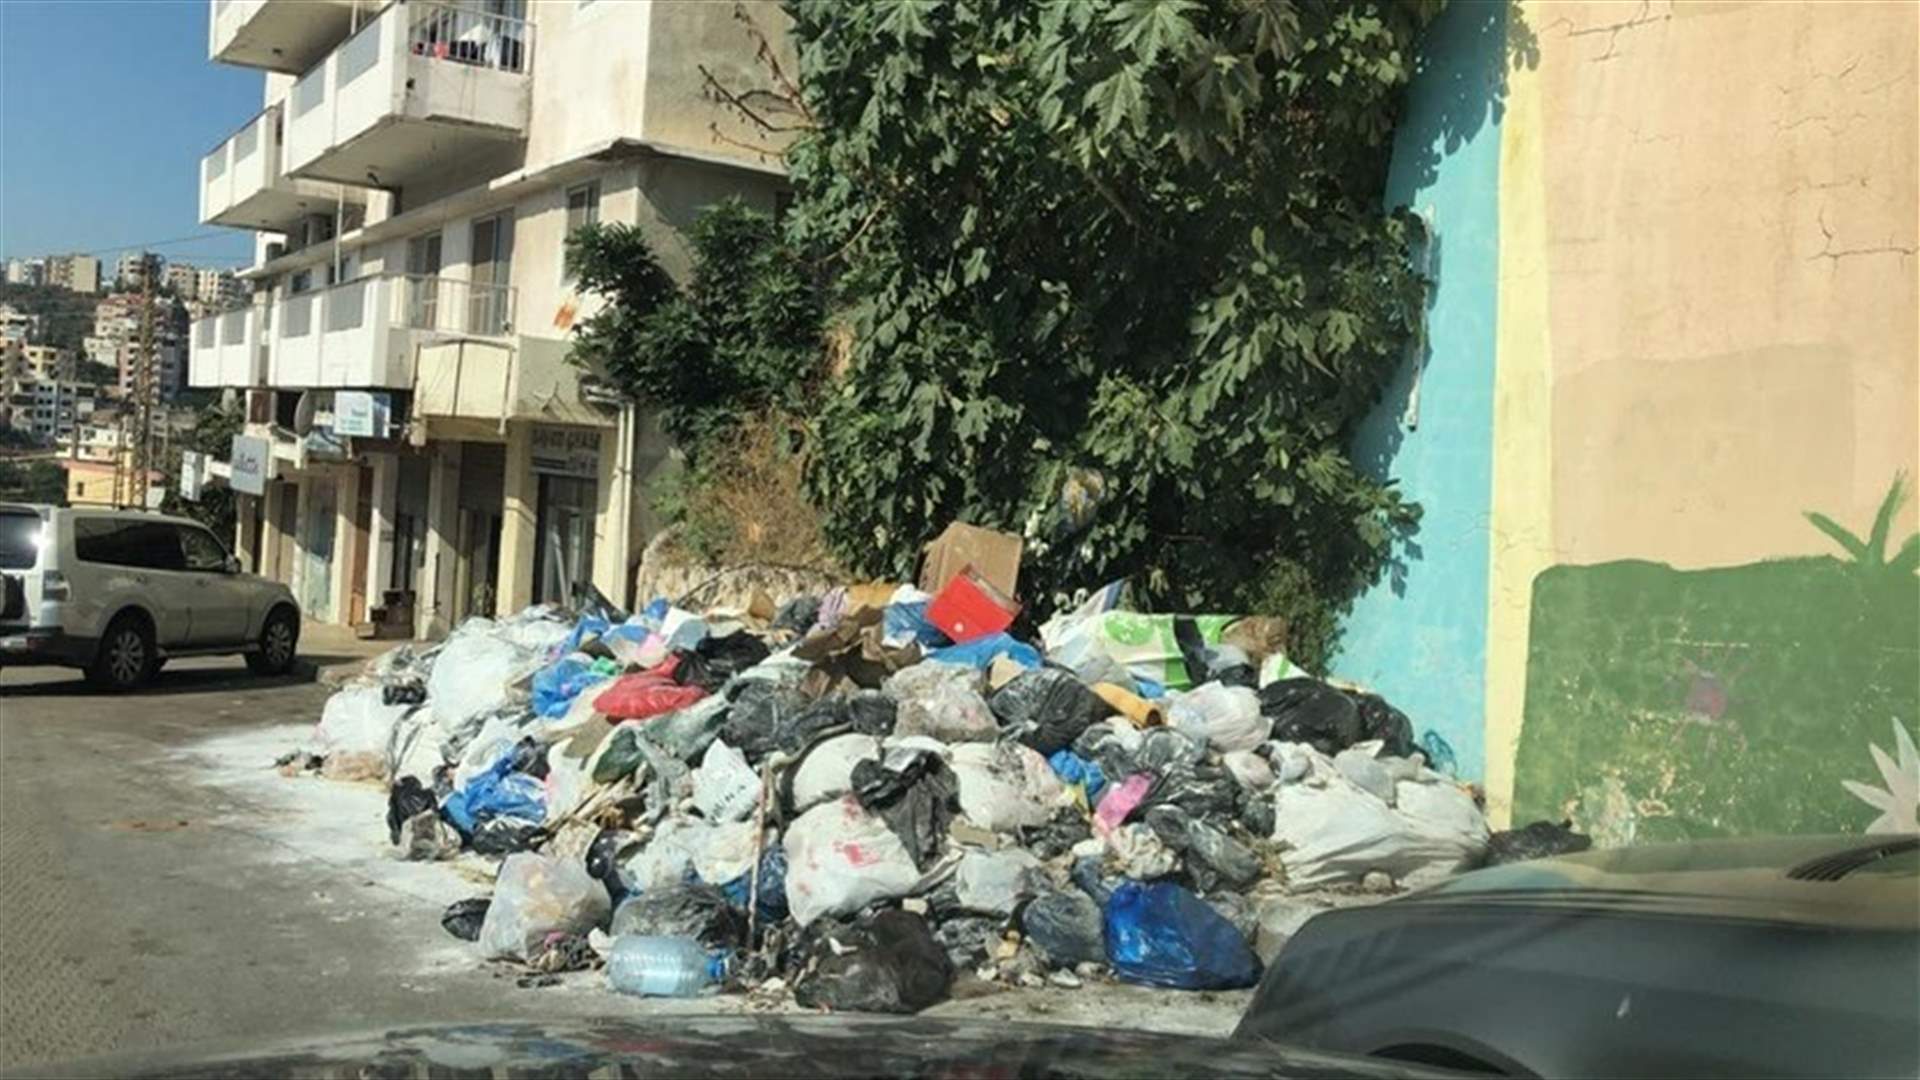 Citizens in Zgharta throw garbage in the streets to protest failure to resolve waste crisis (Video)